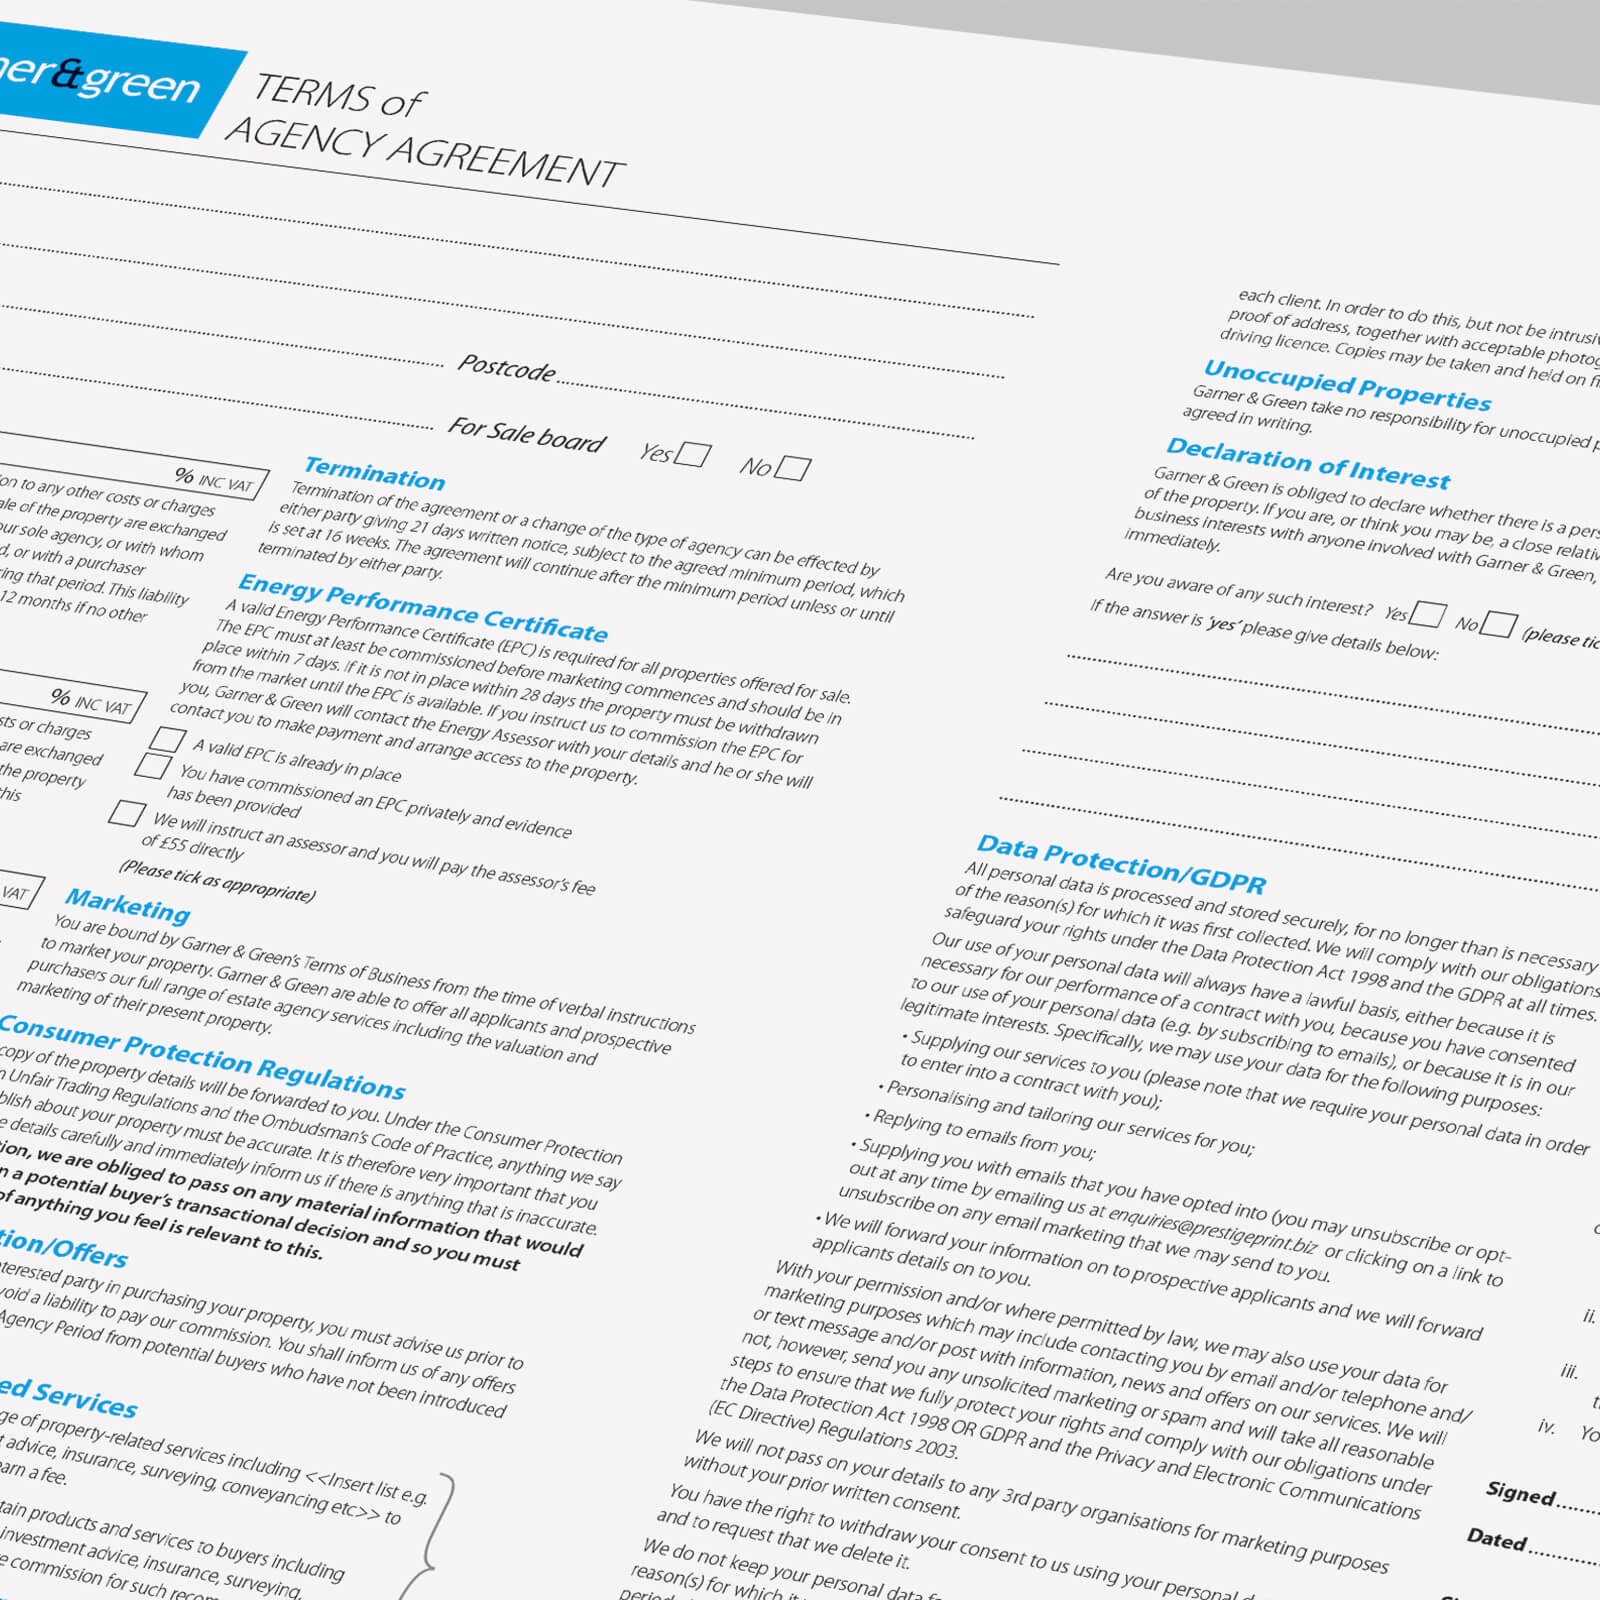 Agency Agreement Draft Estate Agent Agreement Template Ncr